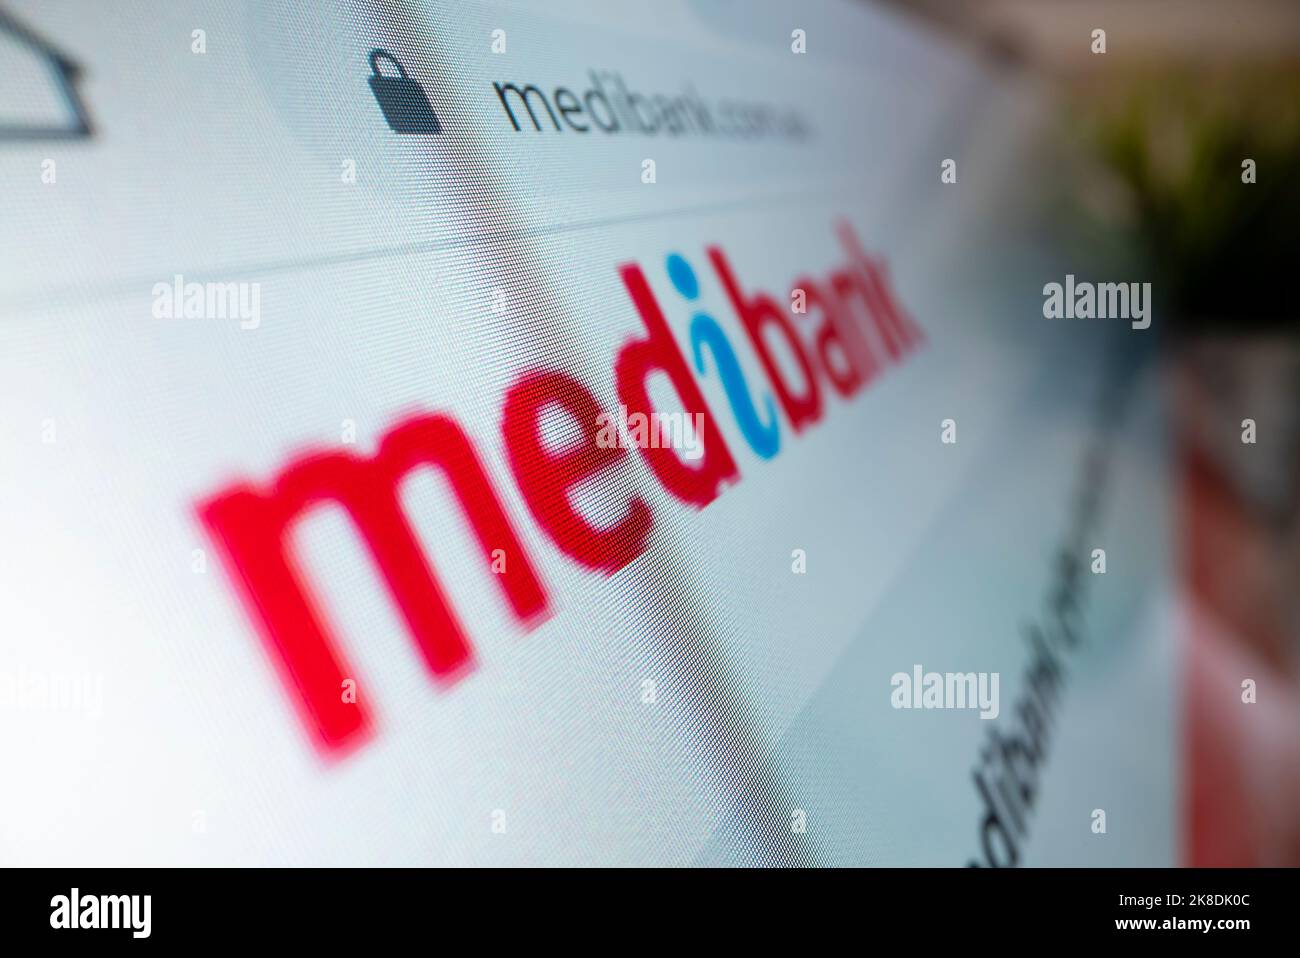 Melbourne, Australia - Oct 21, 2022: Close-up view of Medibank logo on its website, shot with macro probe lens Stock Photo